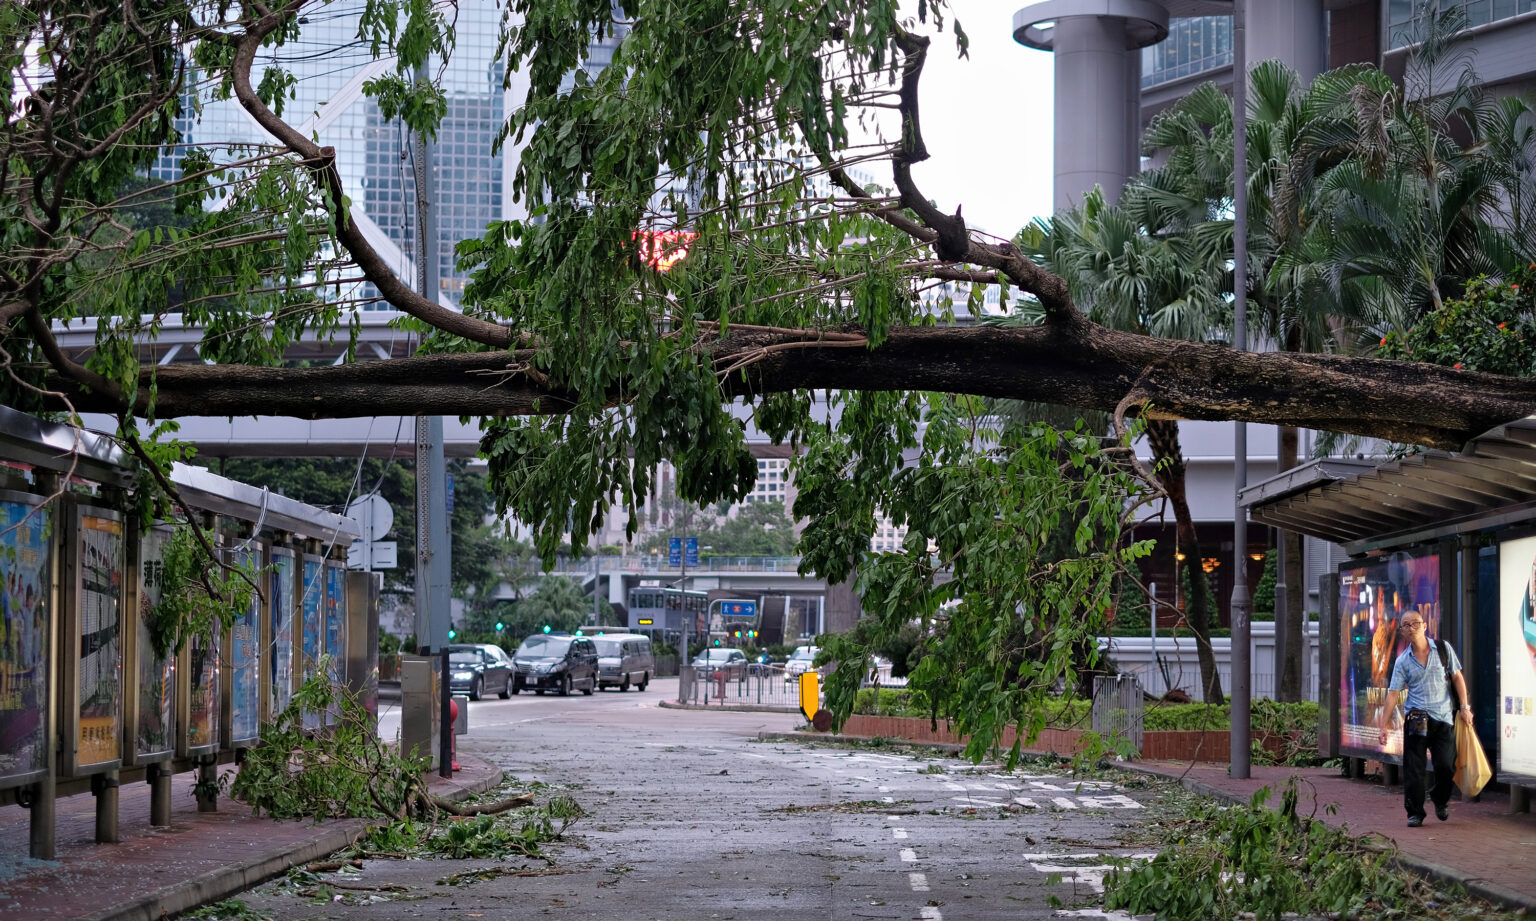 A man walks under a fallen tree rests on the tops of two bus stops on either side of a side road in Hong Kong. There are several other branches on the road. The main road can be seen in the background with cars.